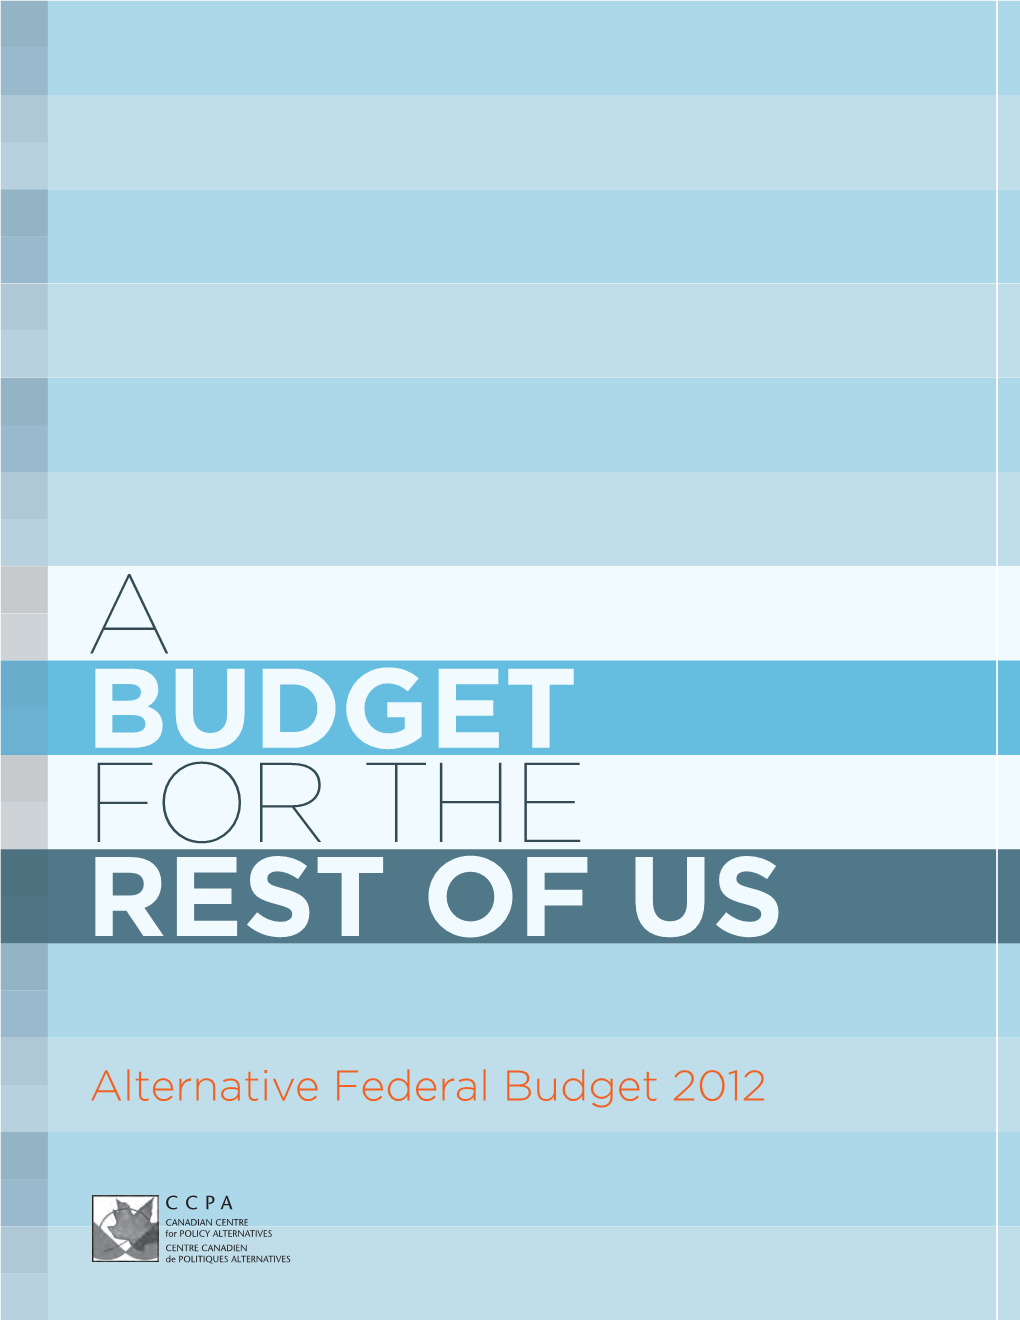 Alternative Federal Budget 2012 5 Their Statement Urged Countries to “Manage Fiscal Consolidation to Pro- Mote Rather Than Reduce Prospects for Growth and Employment